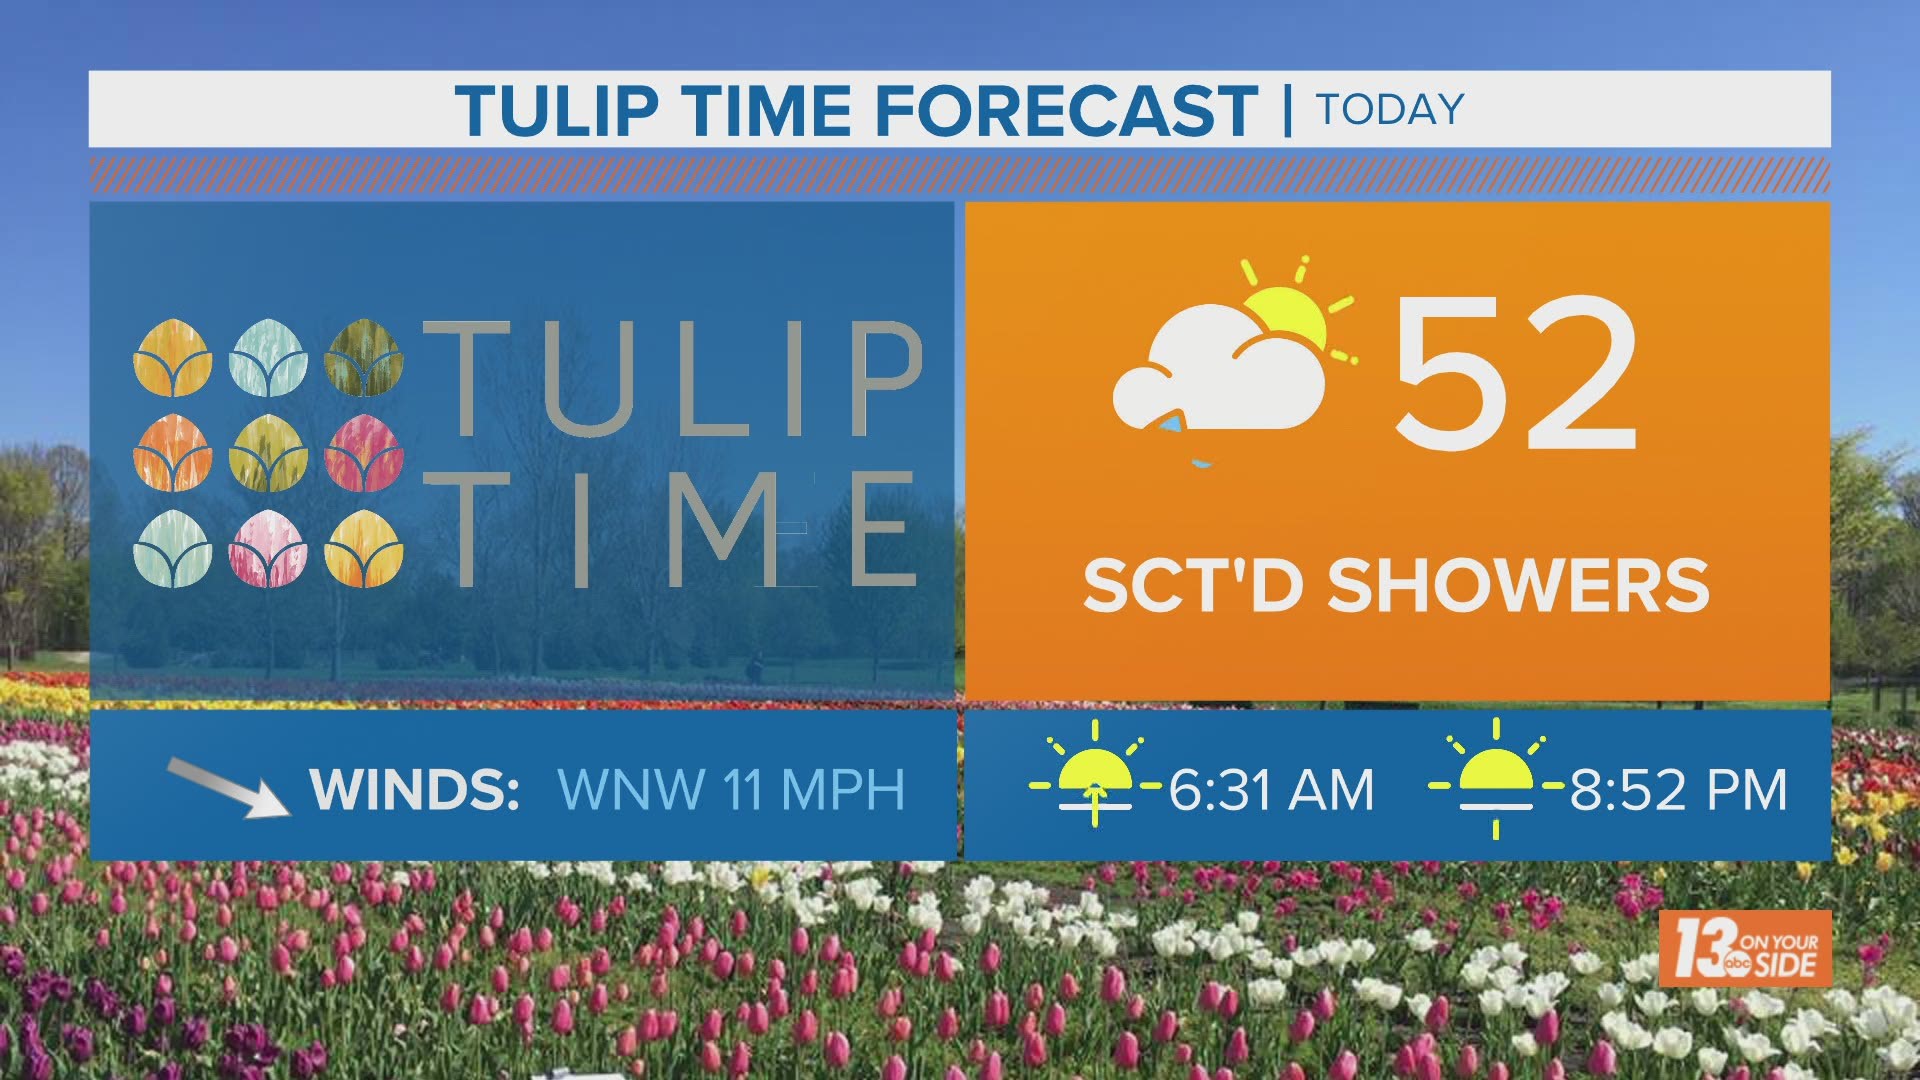 There is one weekend left to check out Tulip Time!